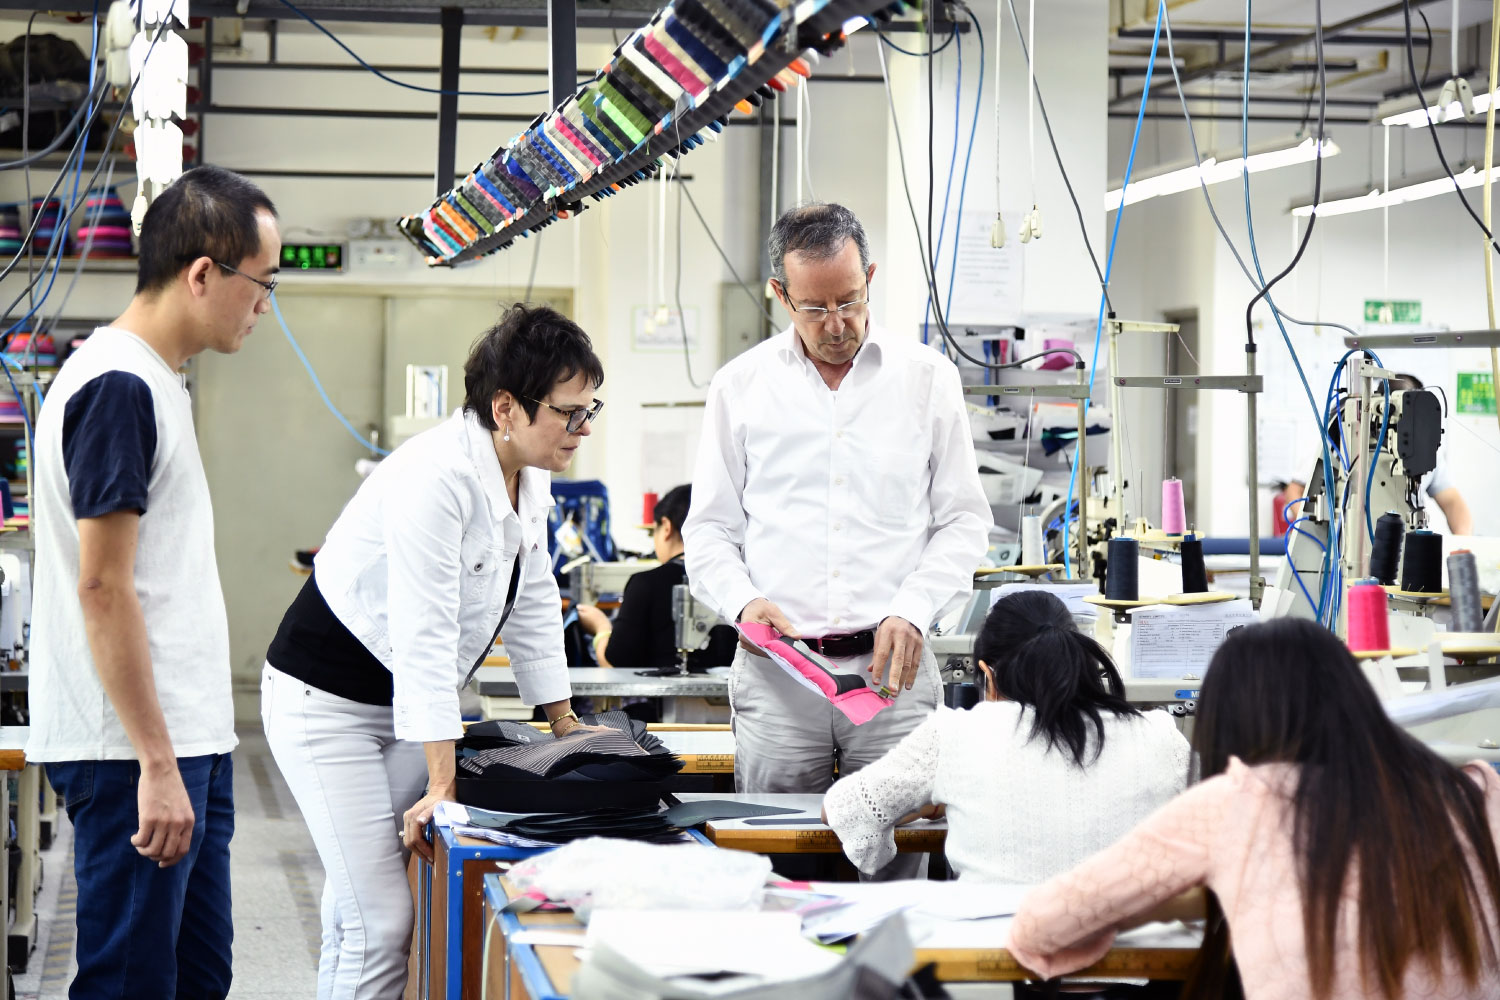 Sample room of Starry in China, managing director, designer and sample room manager talking about a bag part